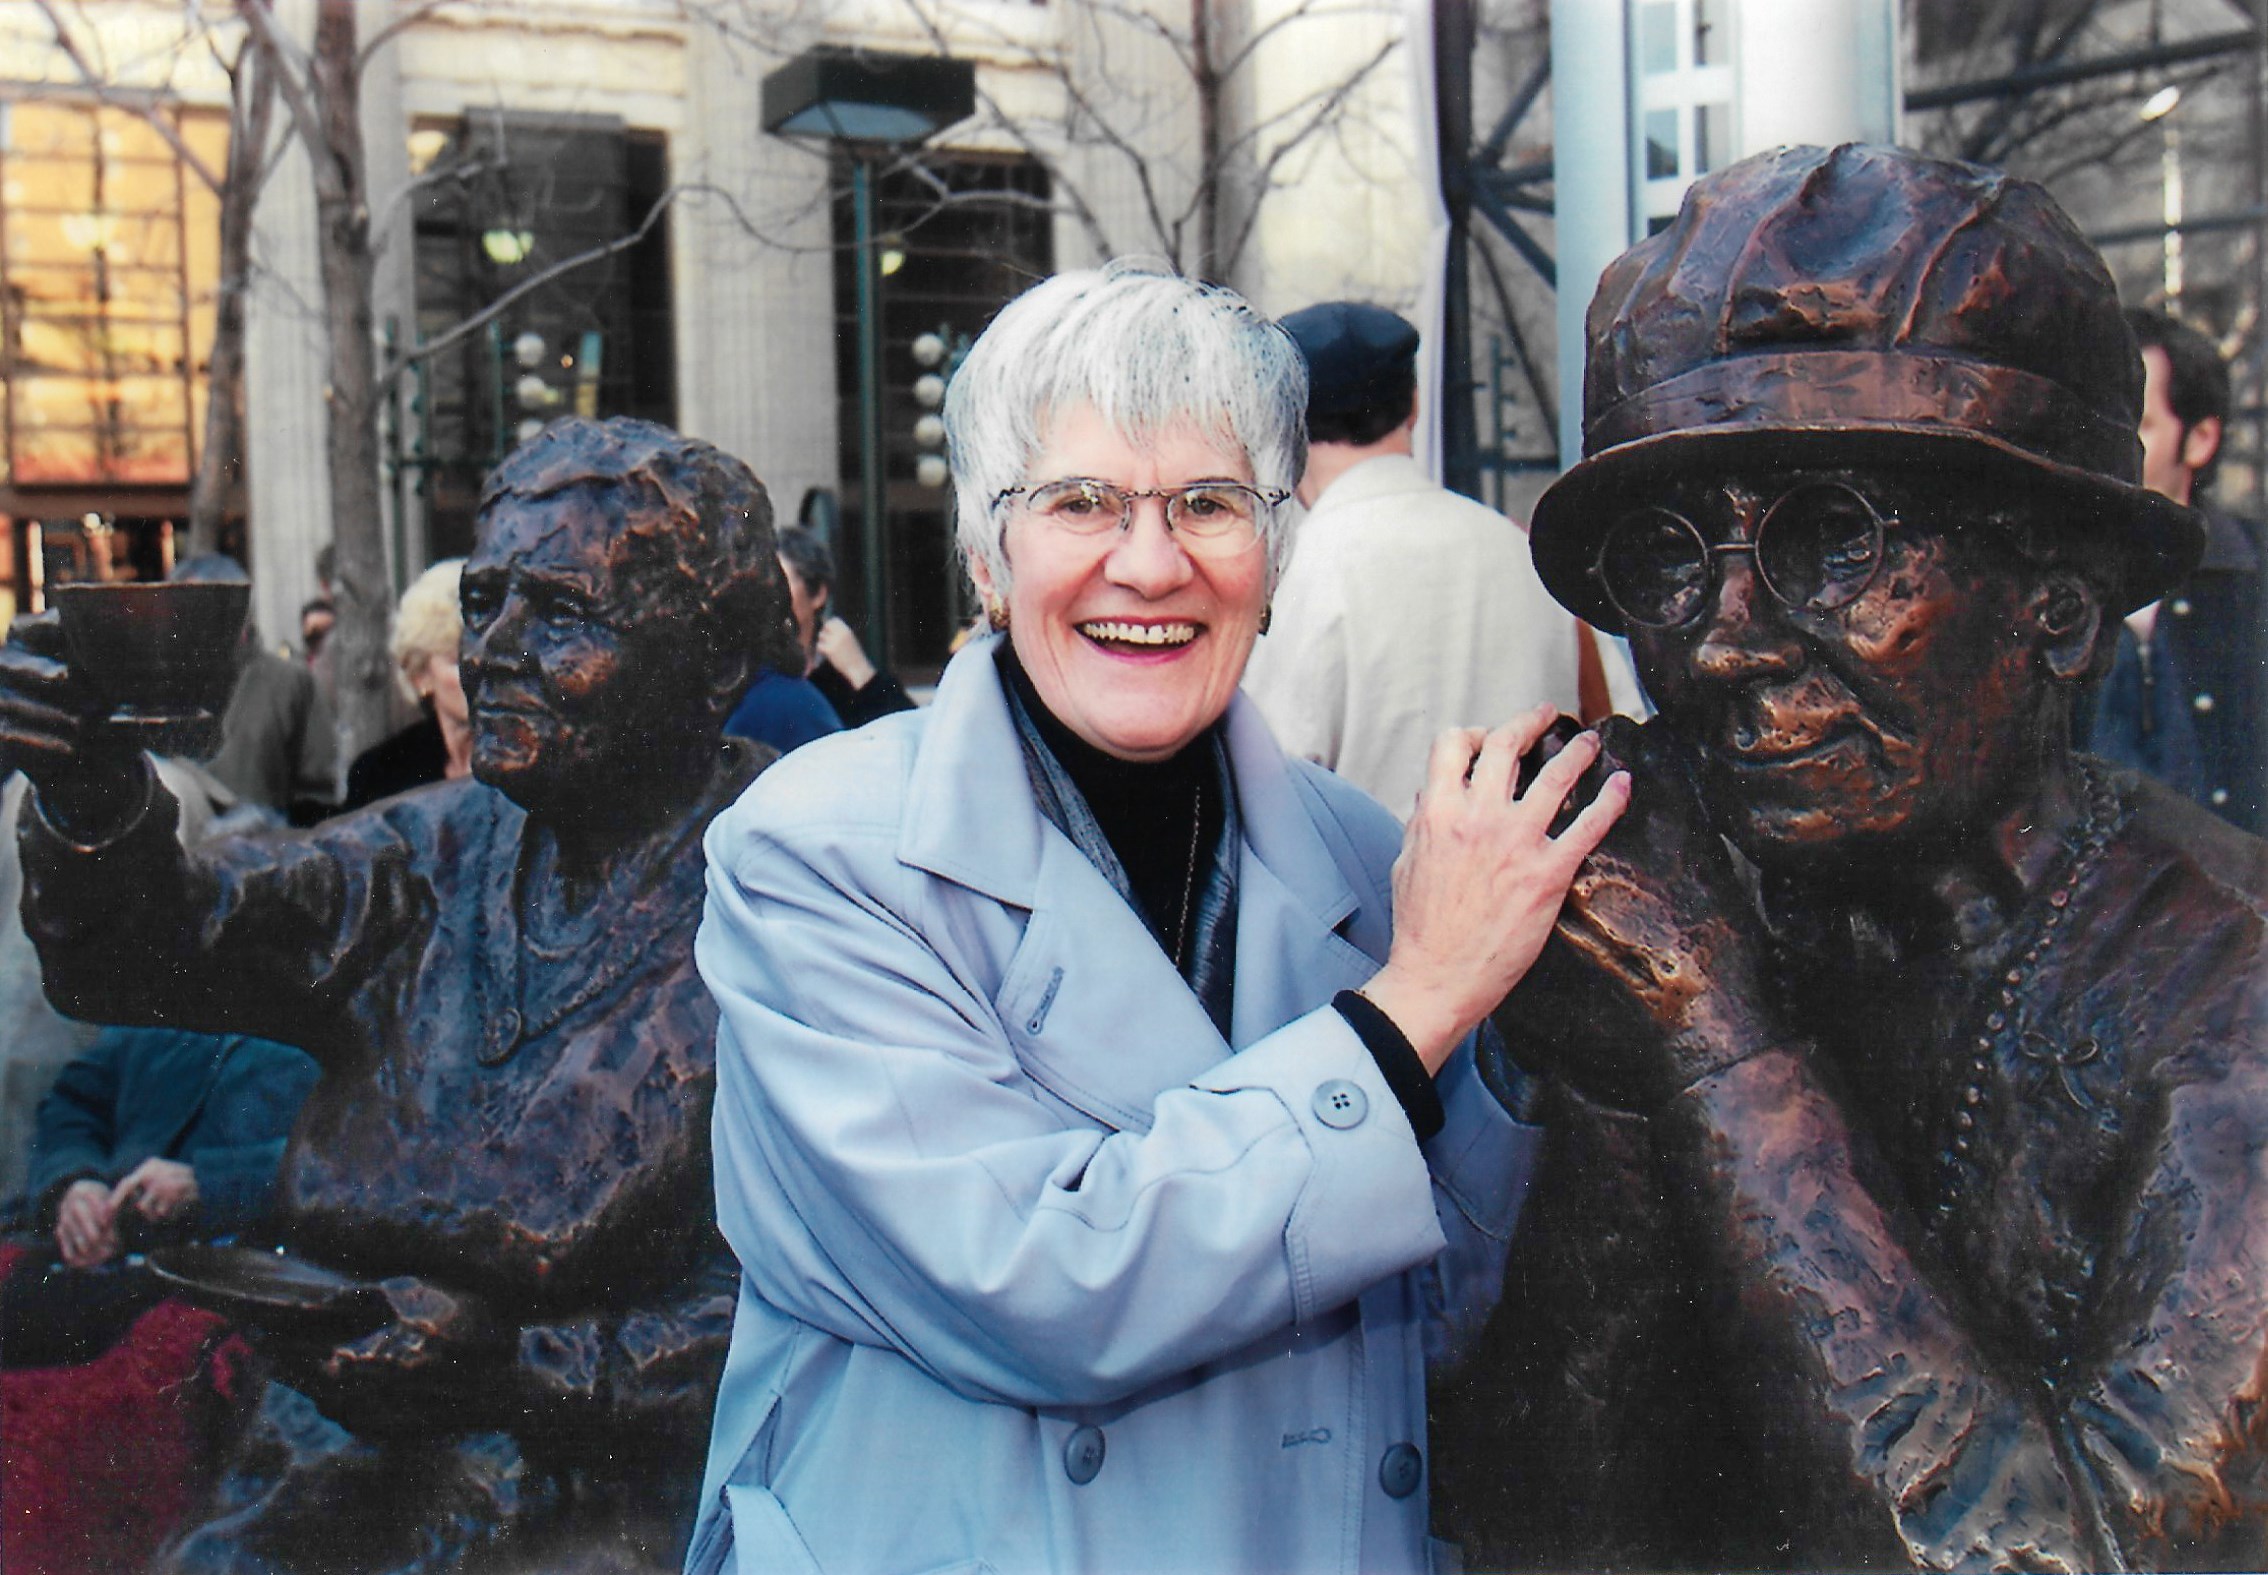 Mrs. Paterson stands with the Calgary version of the Famous Five monument in 1999. For the Ottawa version, unveiled a year later, Mrs. Paterson consulted extensively with Dominion Sculptor Eleanor Milne, head of Parliament’s sculpture program. “Eleanor was a grand lady,” Mrs. Paterson said. “She really inspired me.” (Photo credit: Barbara Paterson)